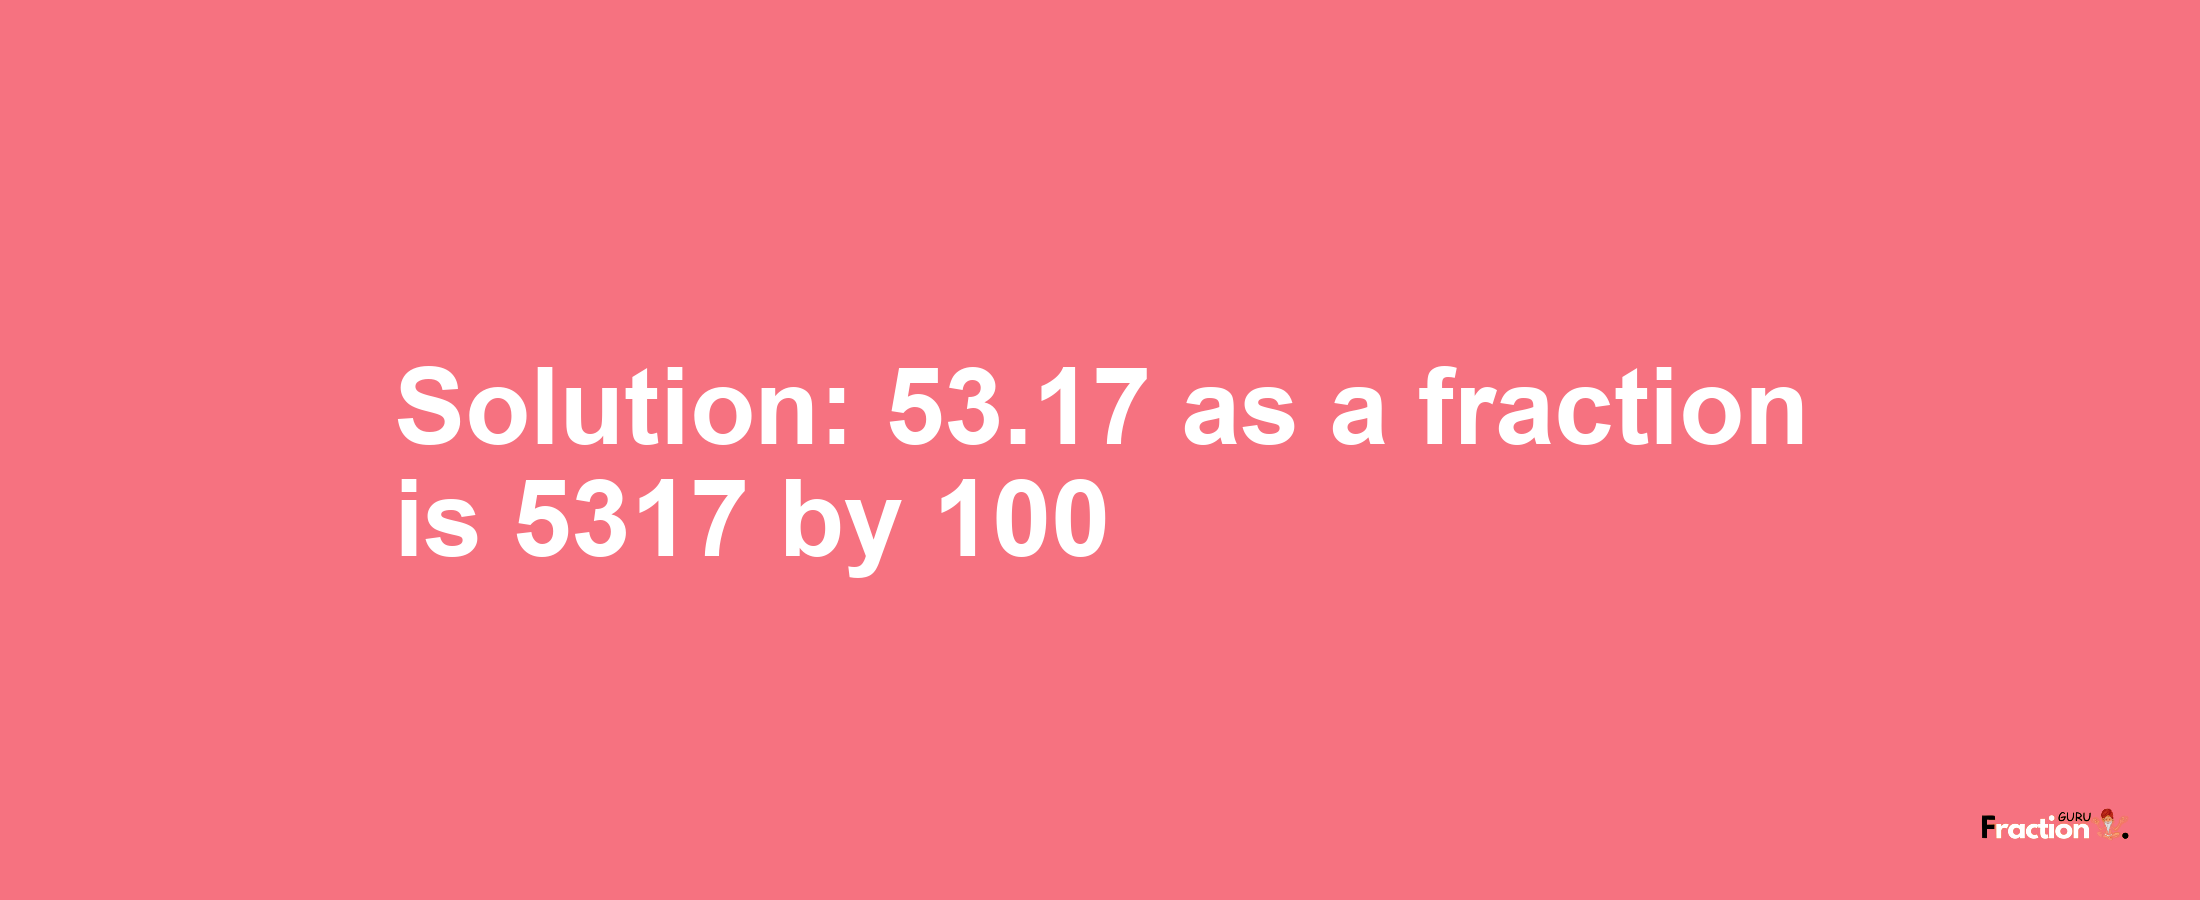 Solution:53.17 as a fraction is 5317/100